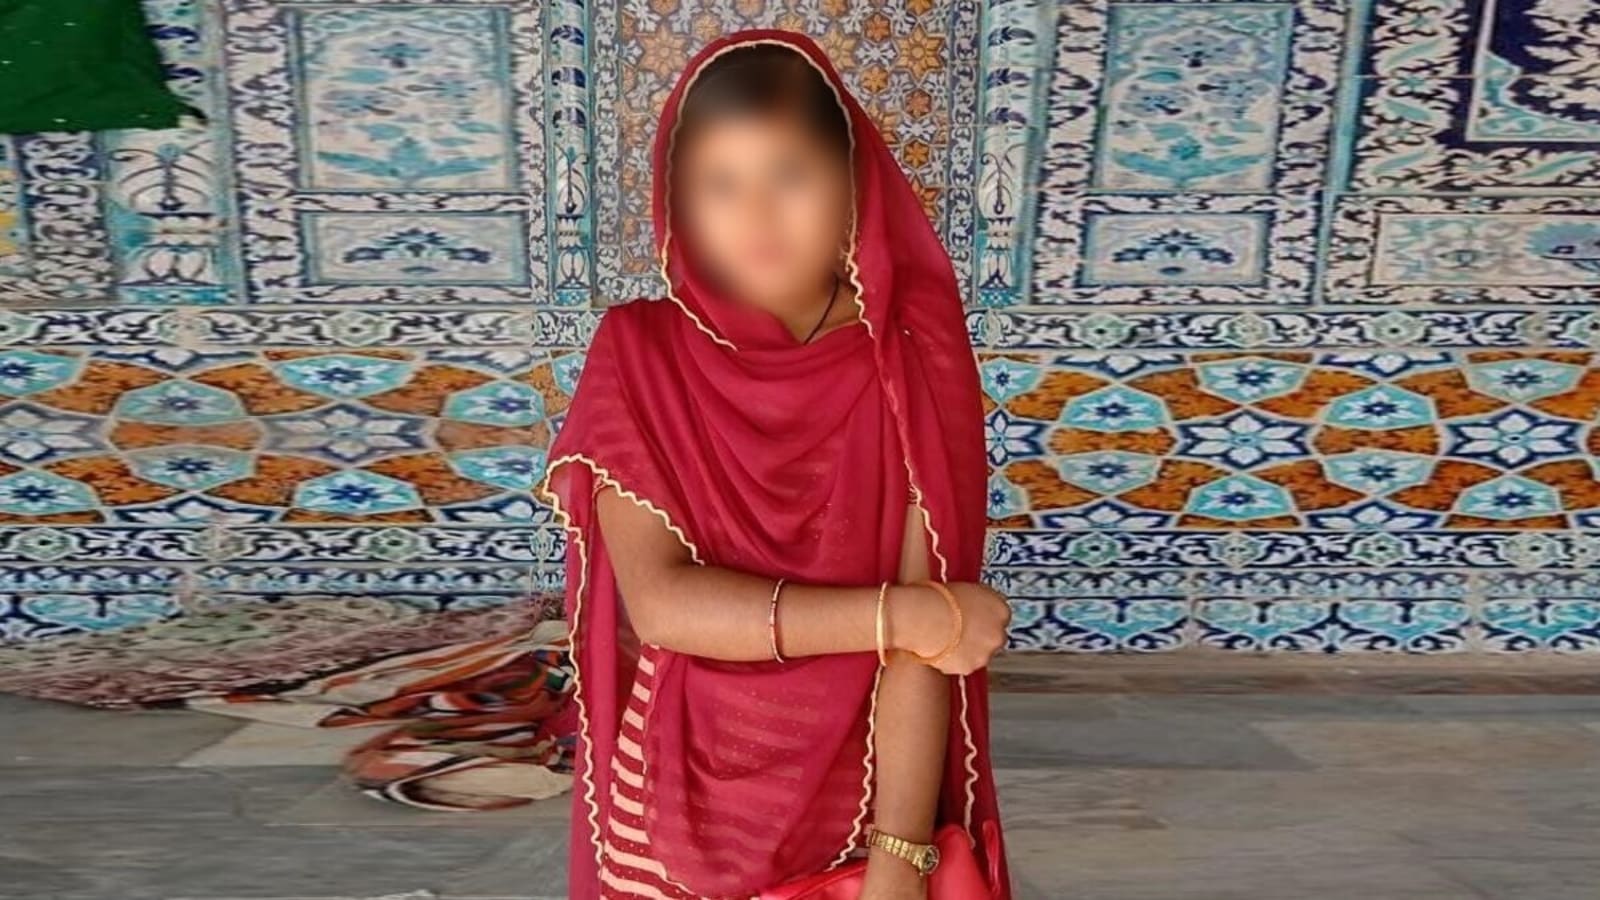 Hindu girl abducted in Pakistan's Sindh, fourth incident in 15 days | World  News - Hindustan Times